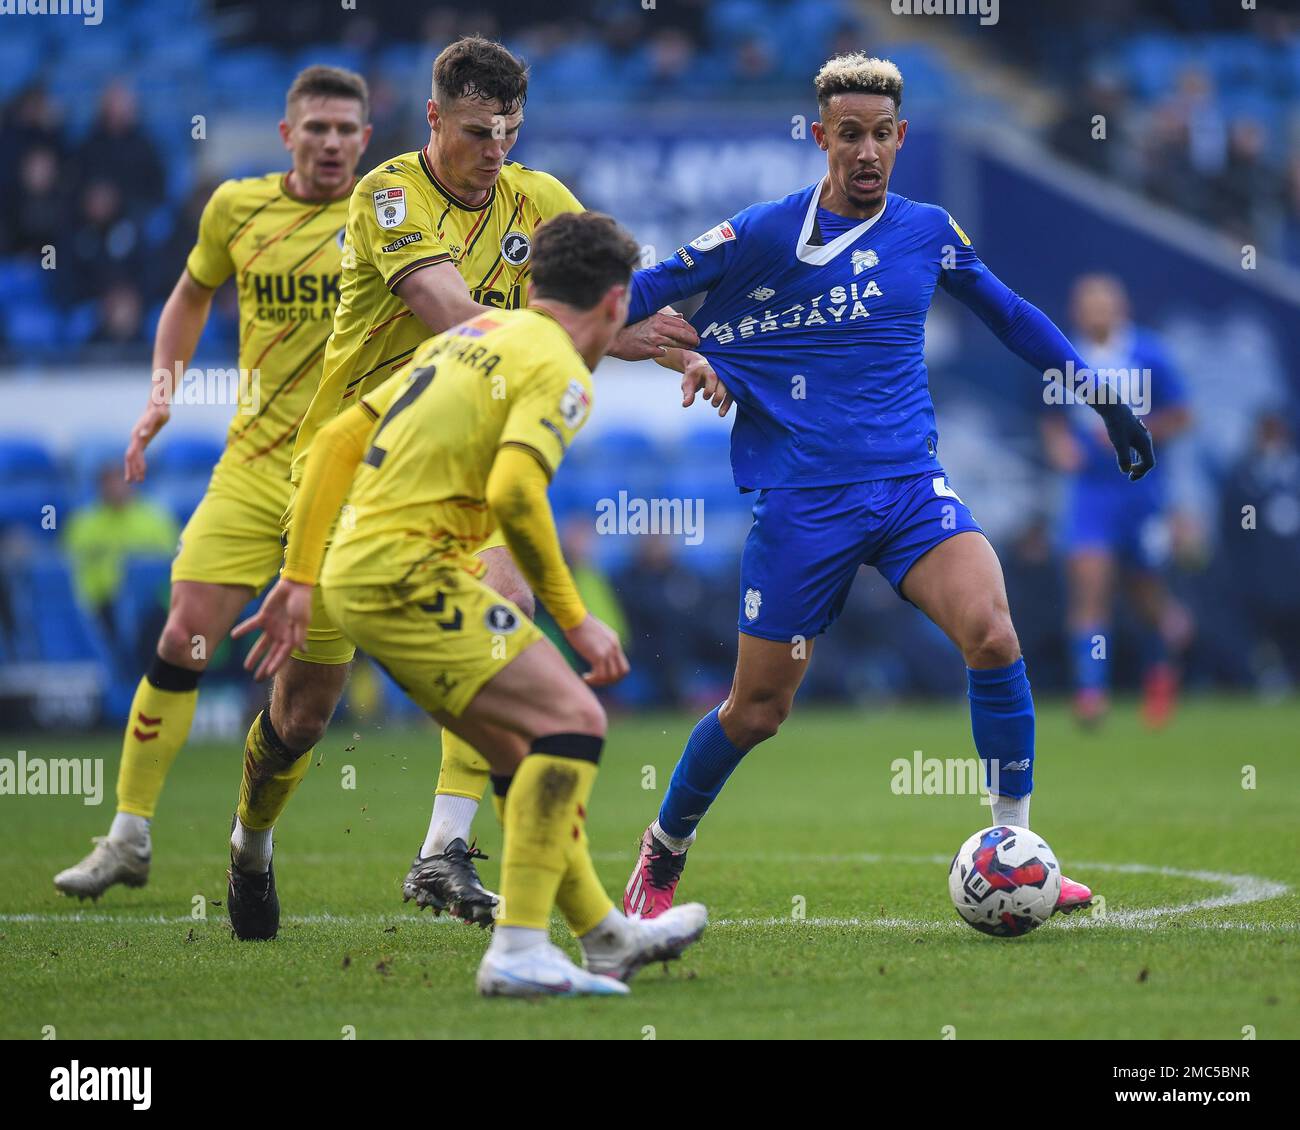 Callum Robinson #47 of Cardiff City being held back by Jake Cooper #5 of Millwall during the Sky Bet Championship match Cardiff City vs Millwall at Cardiff City Stadium, Cardiff, United Kingdom, 21st January 2023  (Photo by Mike Jones/News Images) Stock Photo